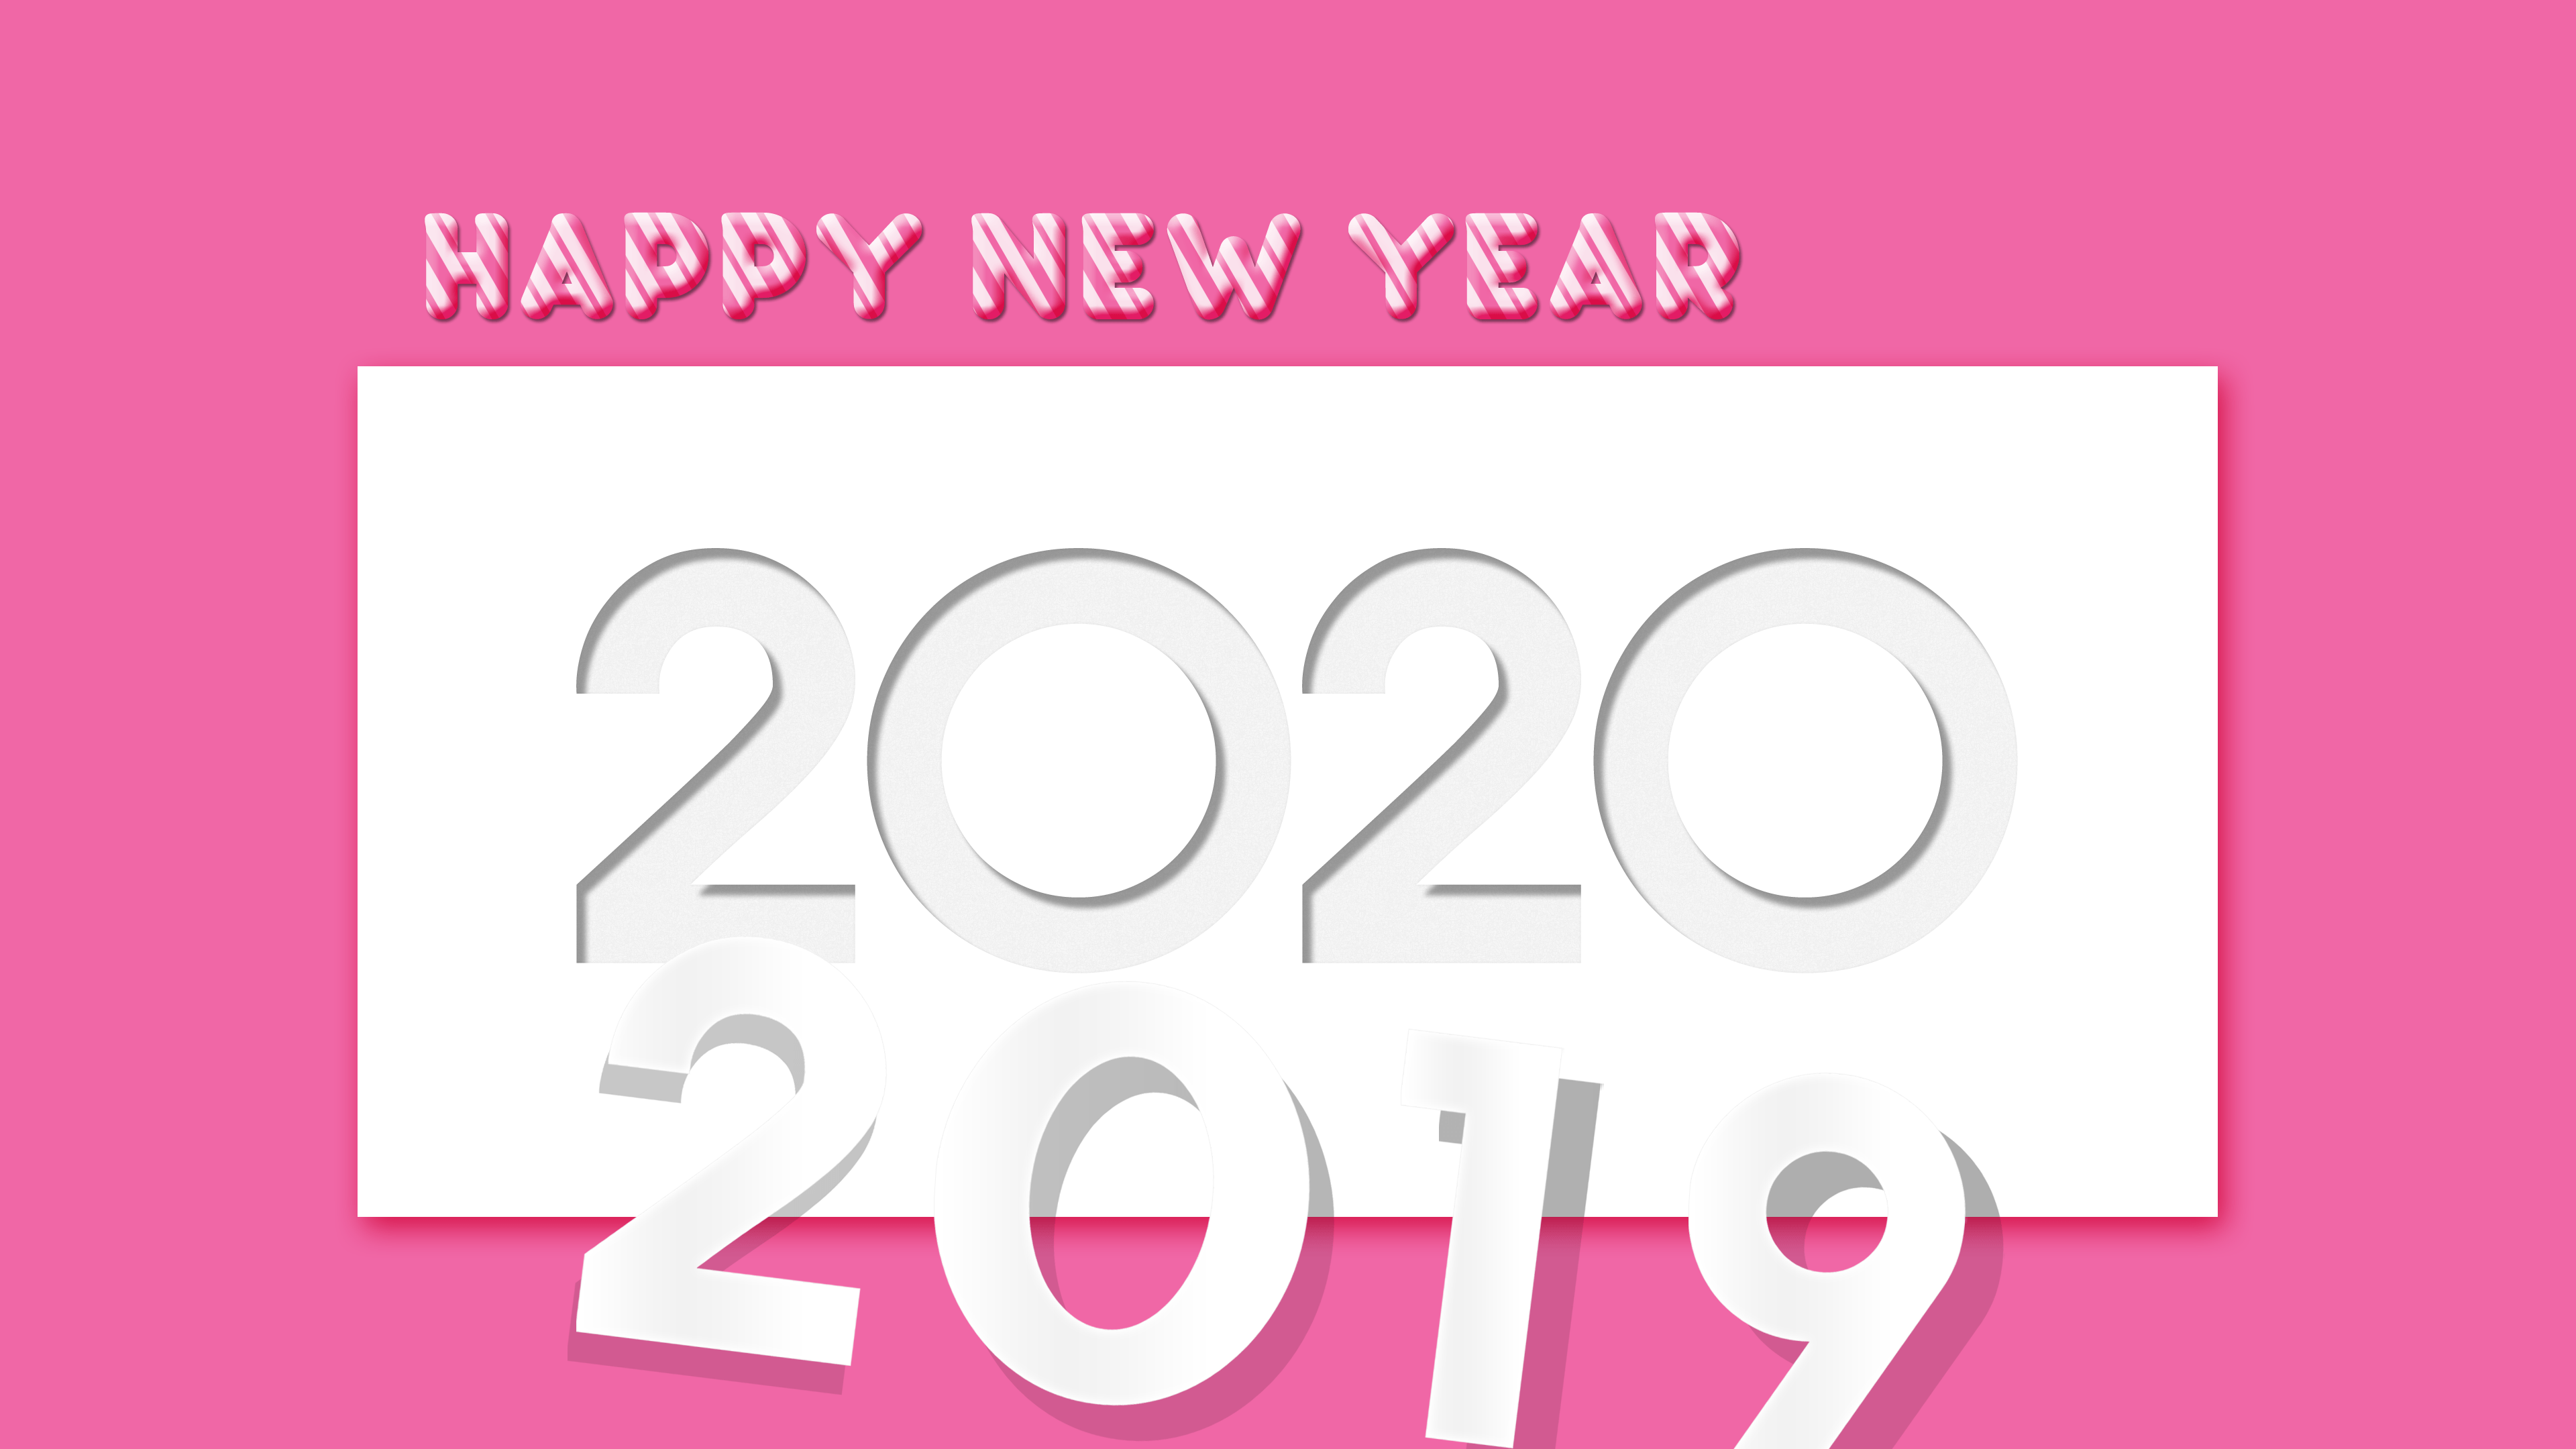 New Year 2020 4k Ultra HD Wallpaper. Background Image